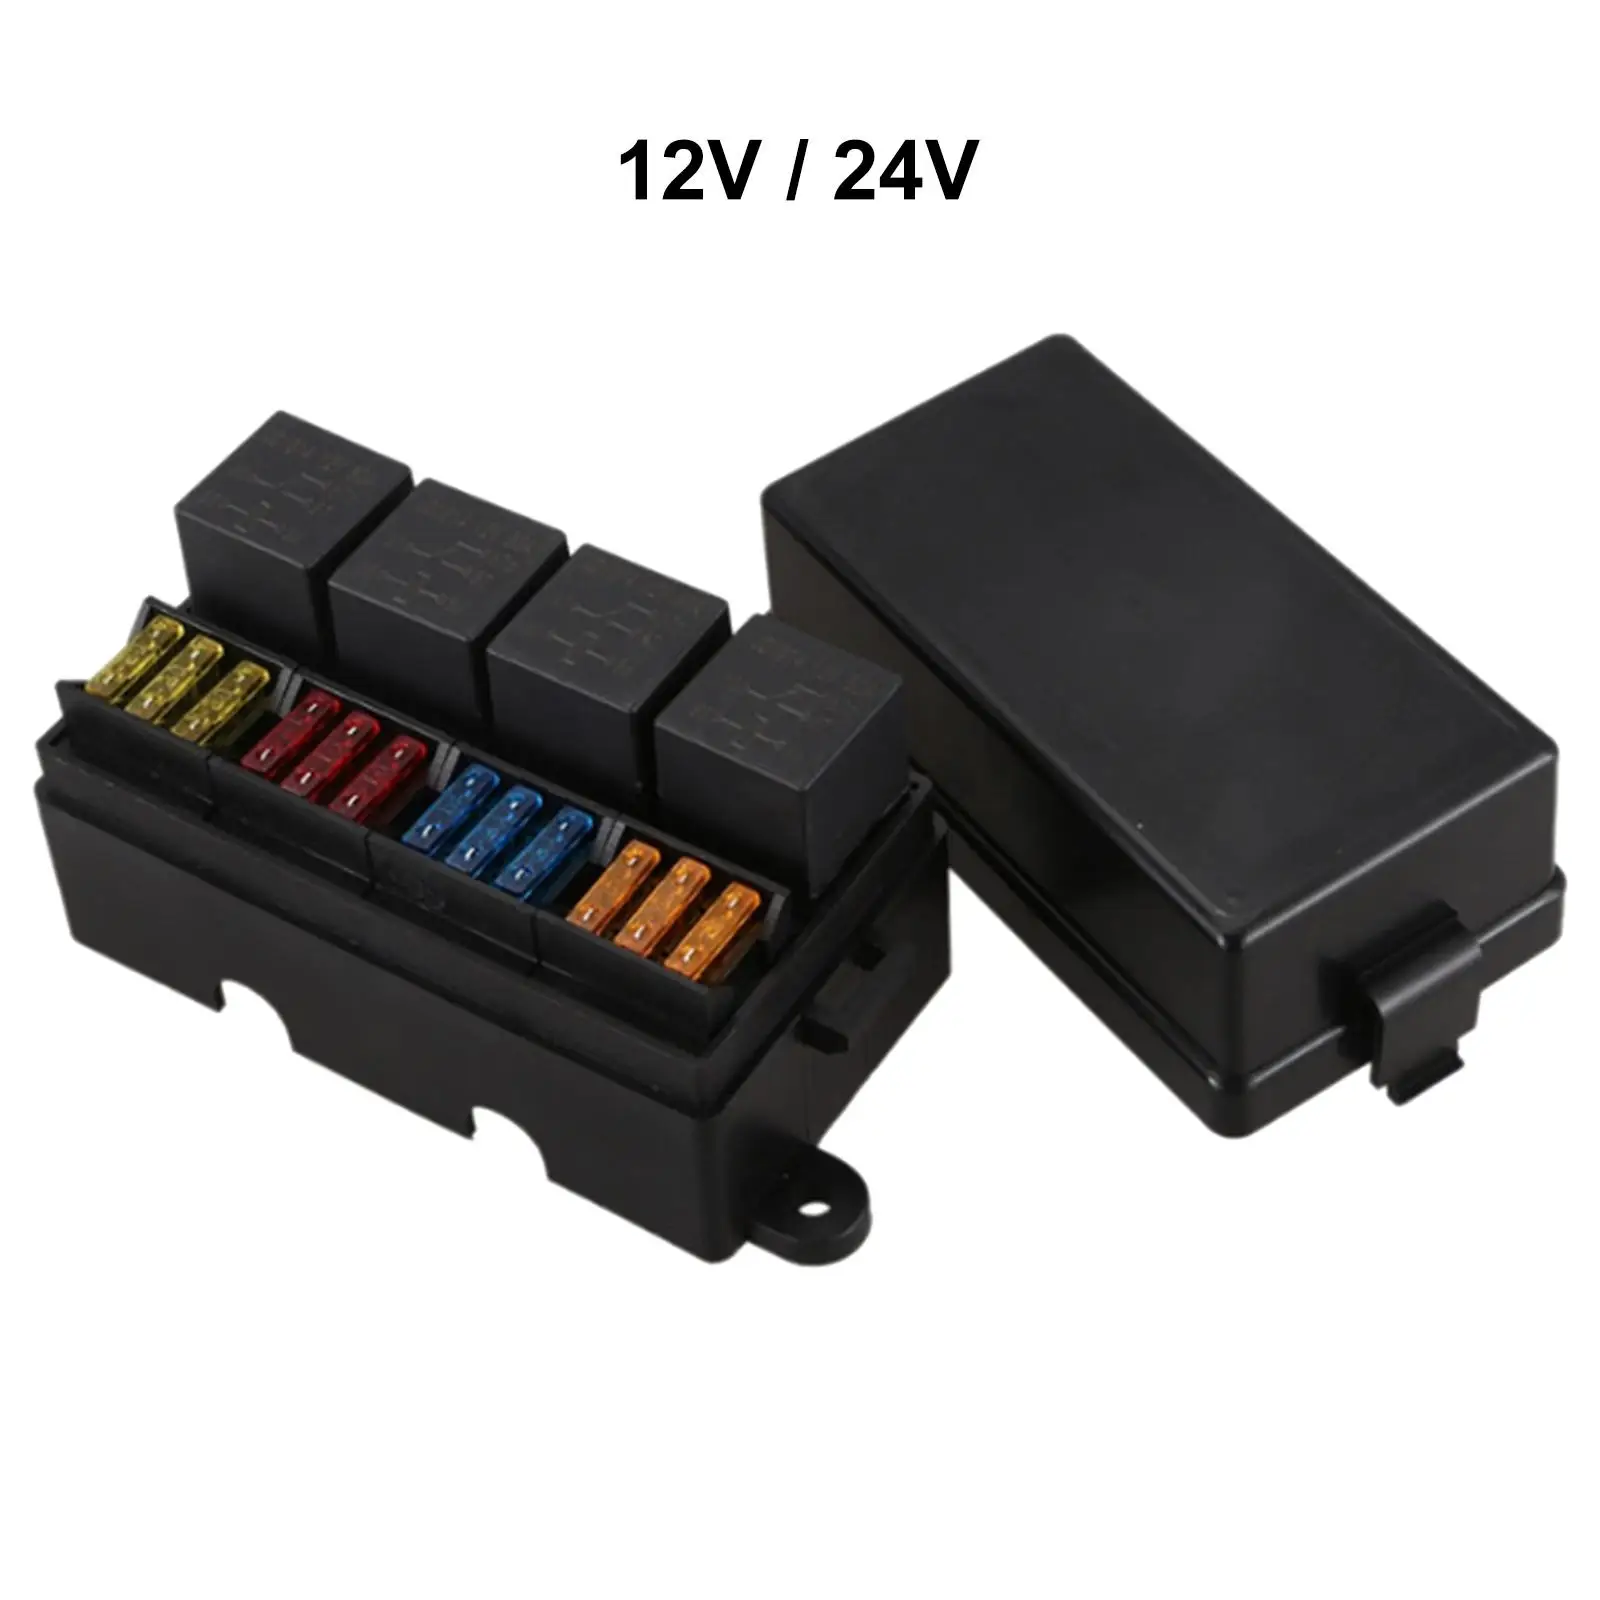 Automotive Car 12 Way Blade Fuse Holder Box with Spade Terminals Replacement